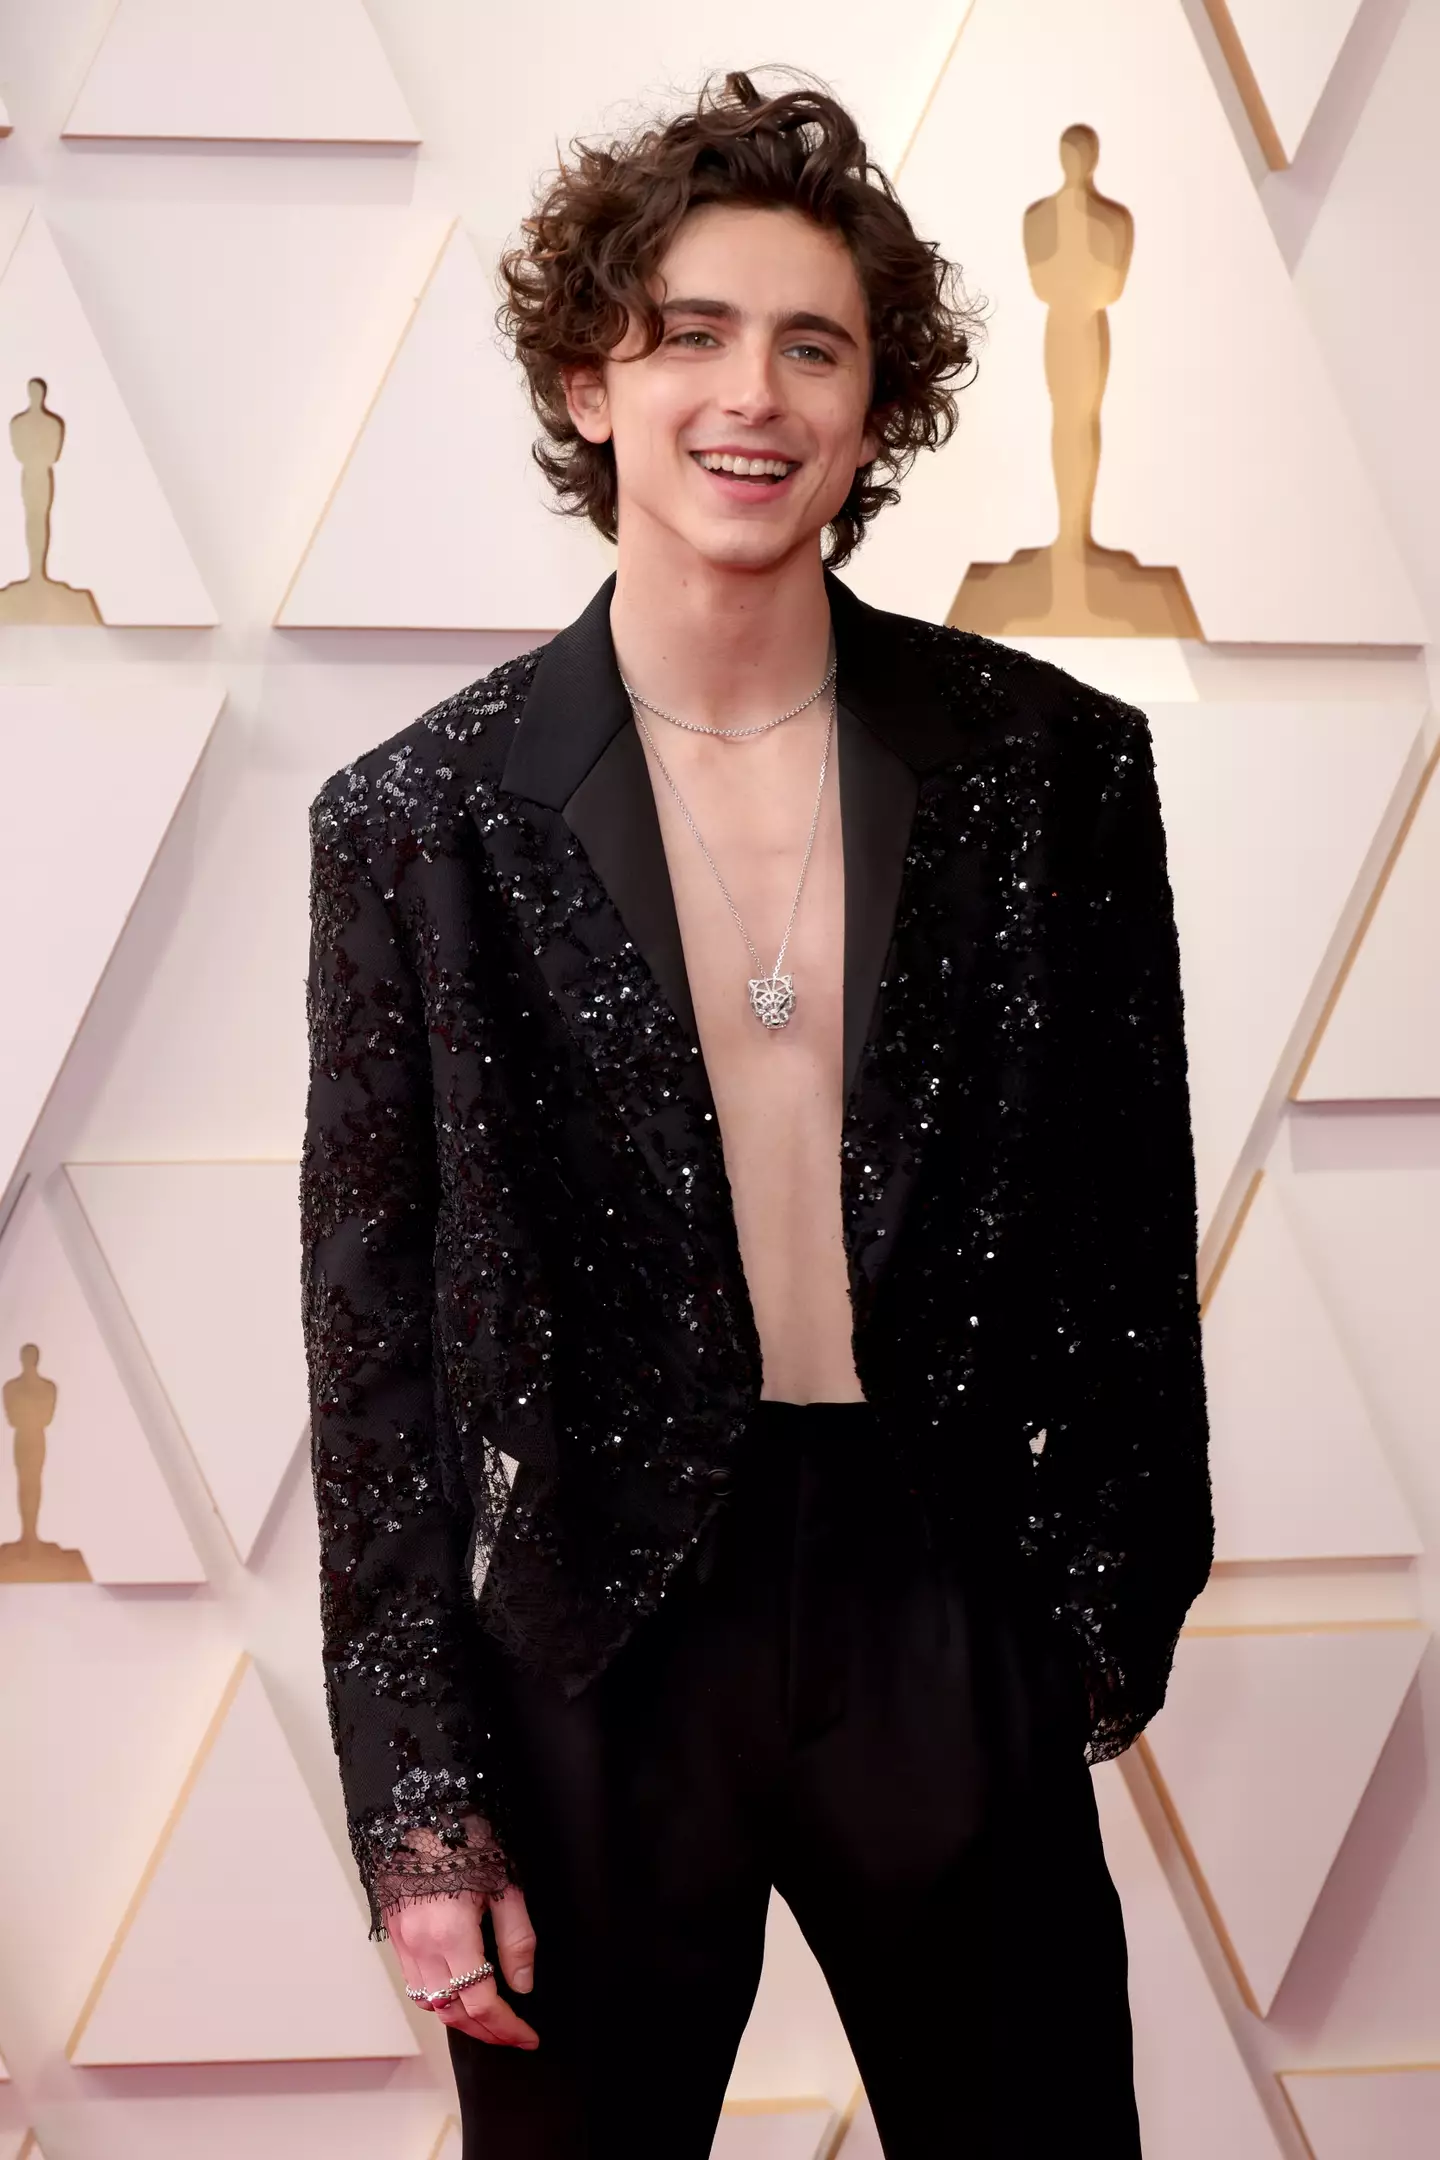 Timothée Chalamet was also under fire in the article.